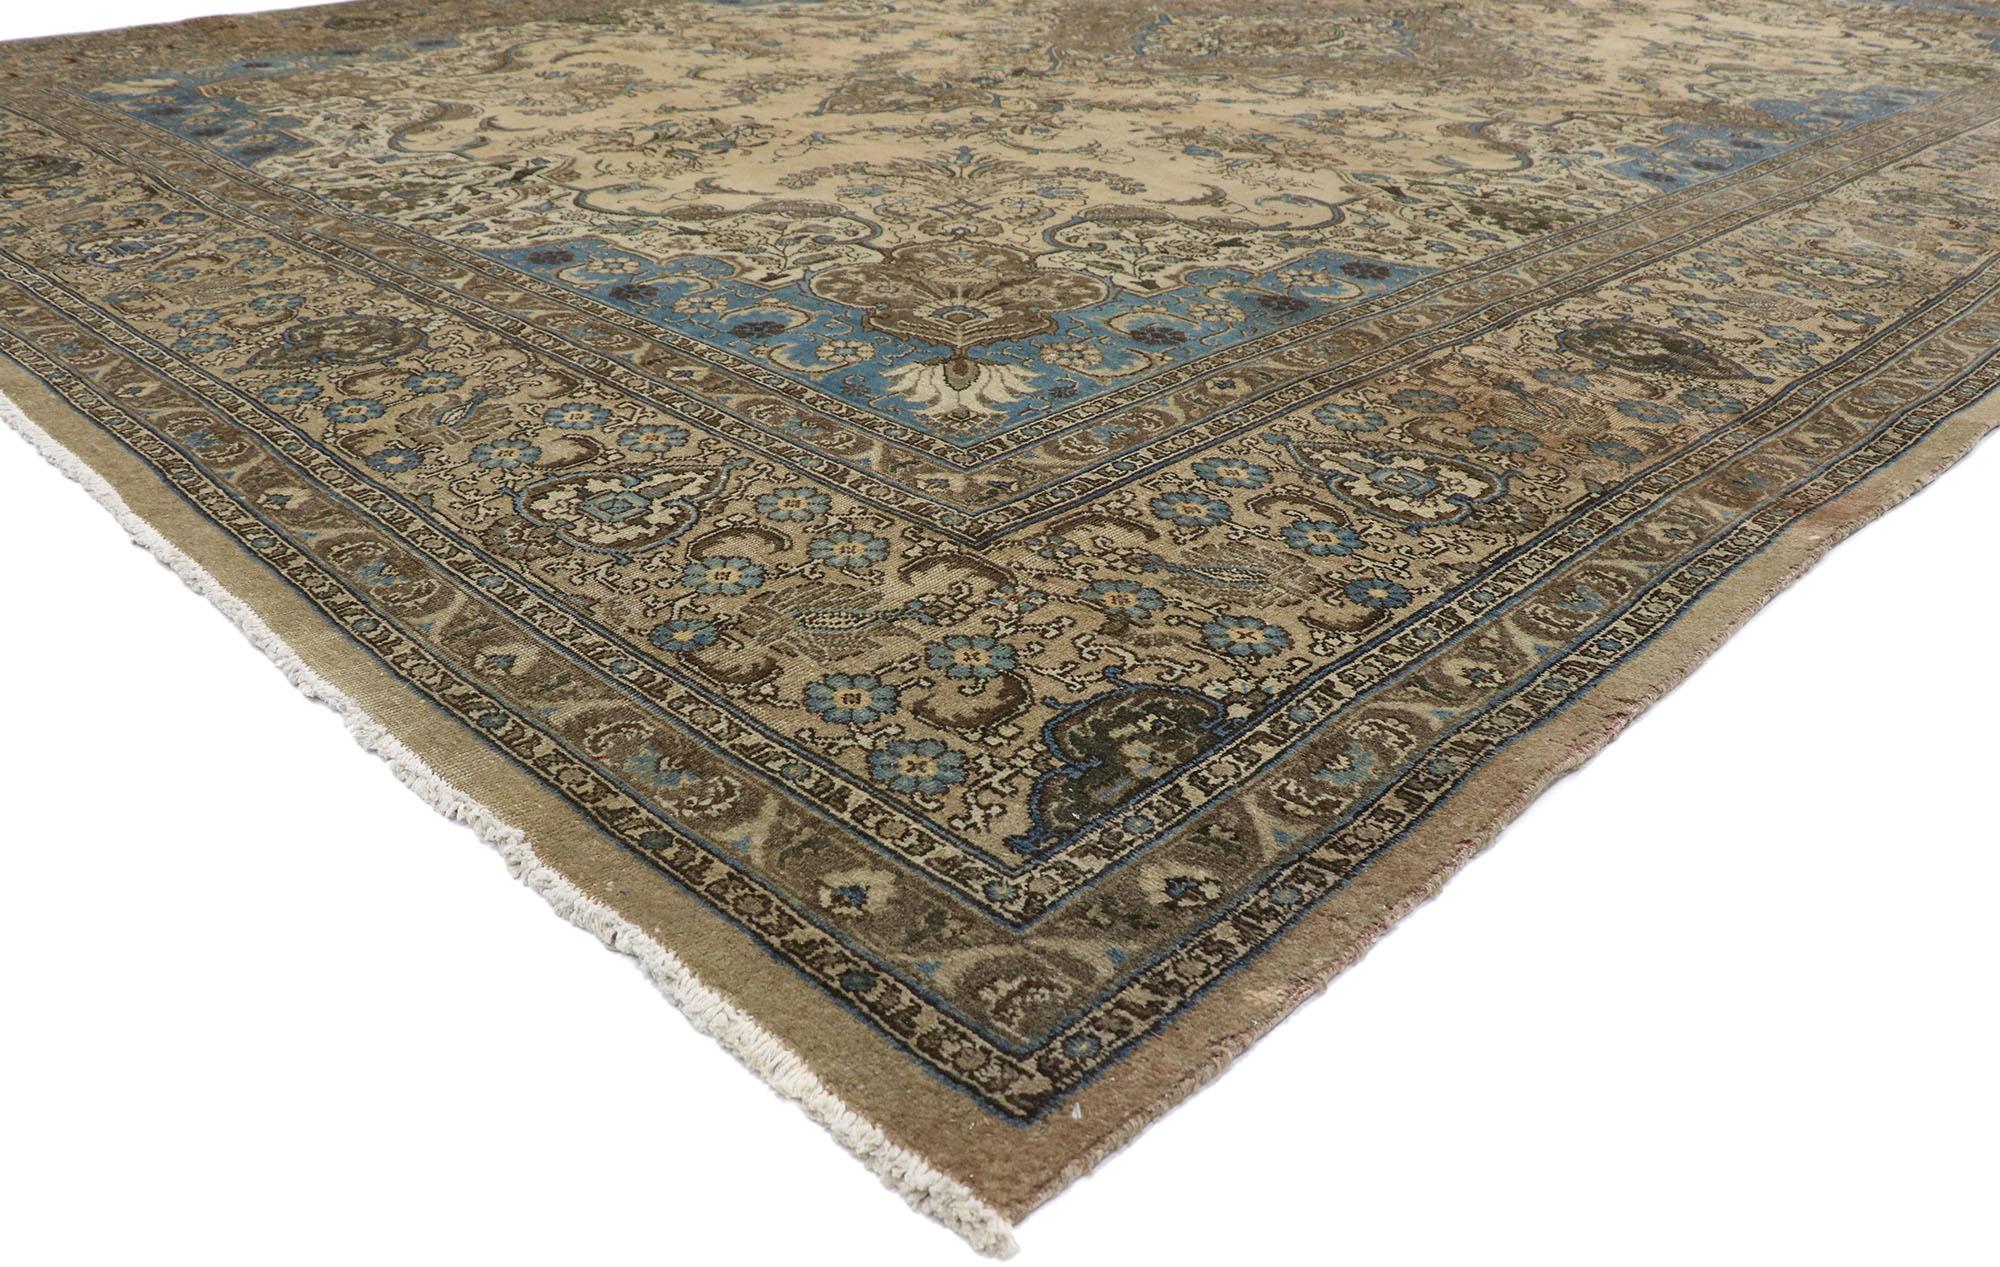 78090 Antique Persian Tabriz rug with Rustic French Cottage Style 12'04 x 18'05. Understated elegance combined with cool blue hues and warm taupe tones, this hand-knotted wool antique Persian Tabriz rug is poised to impress. Taking center stage is a